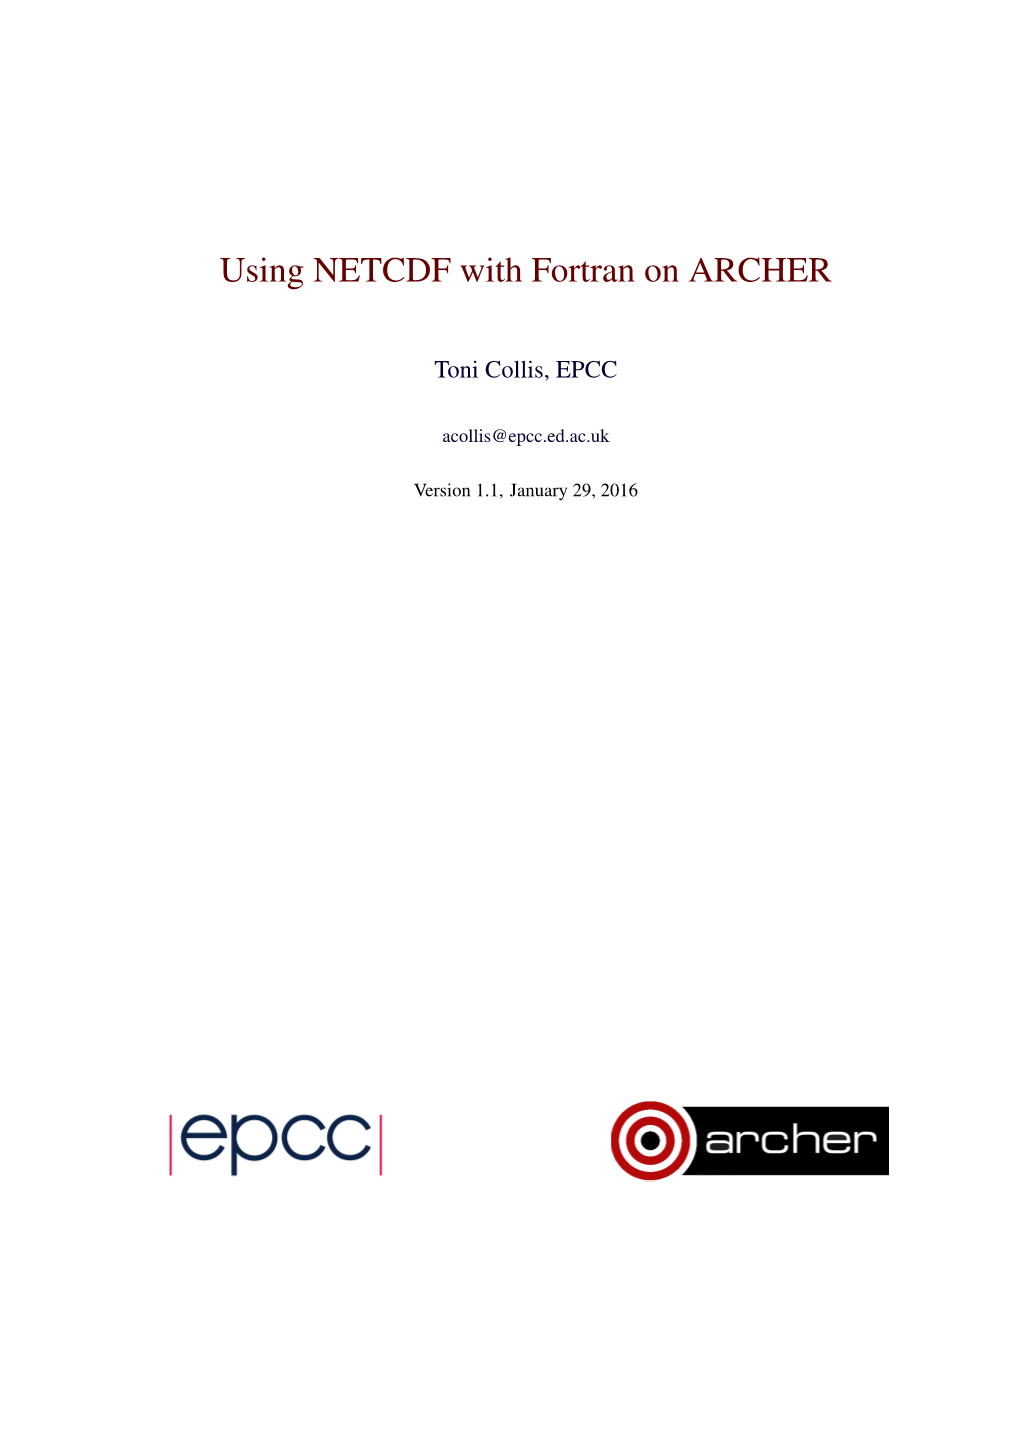 Using NETCDF with Fortran on ARCHER